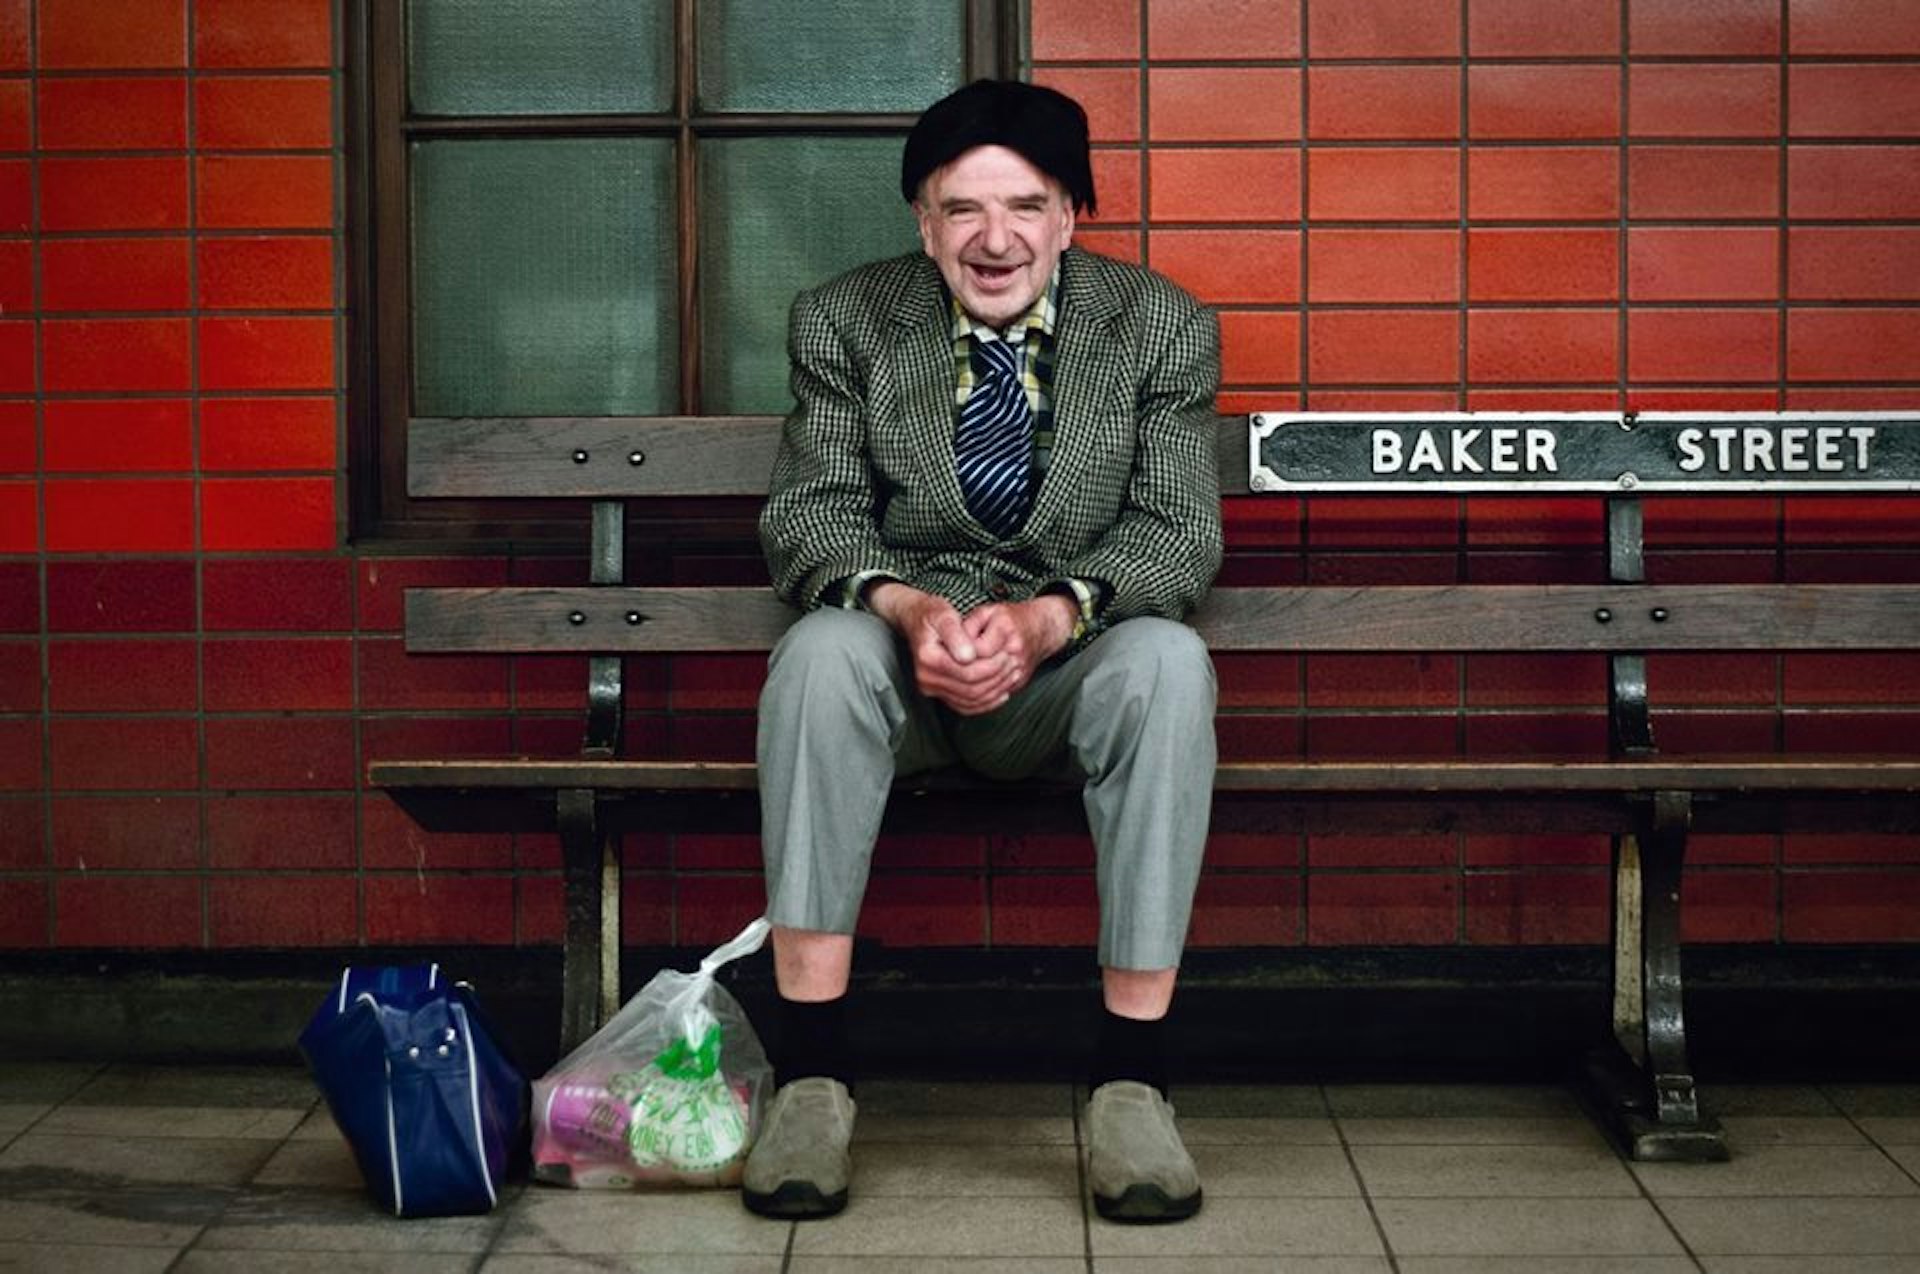 150 portraits of London commuters to celebrate 150 years of the Tube